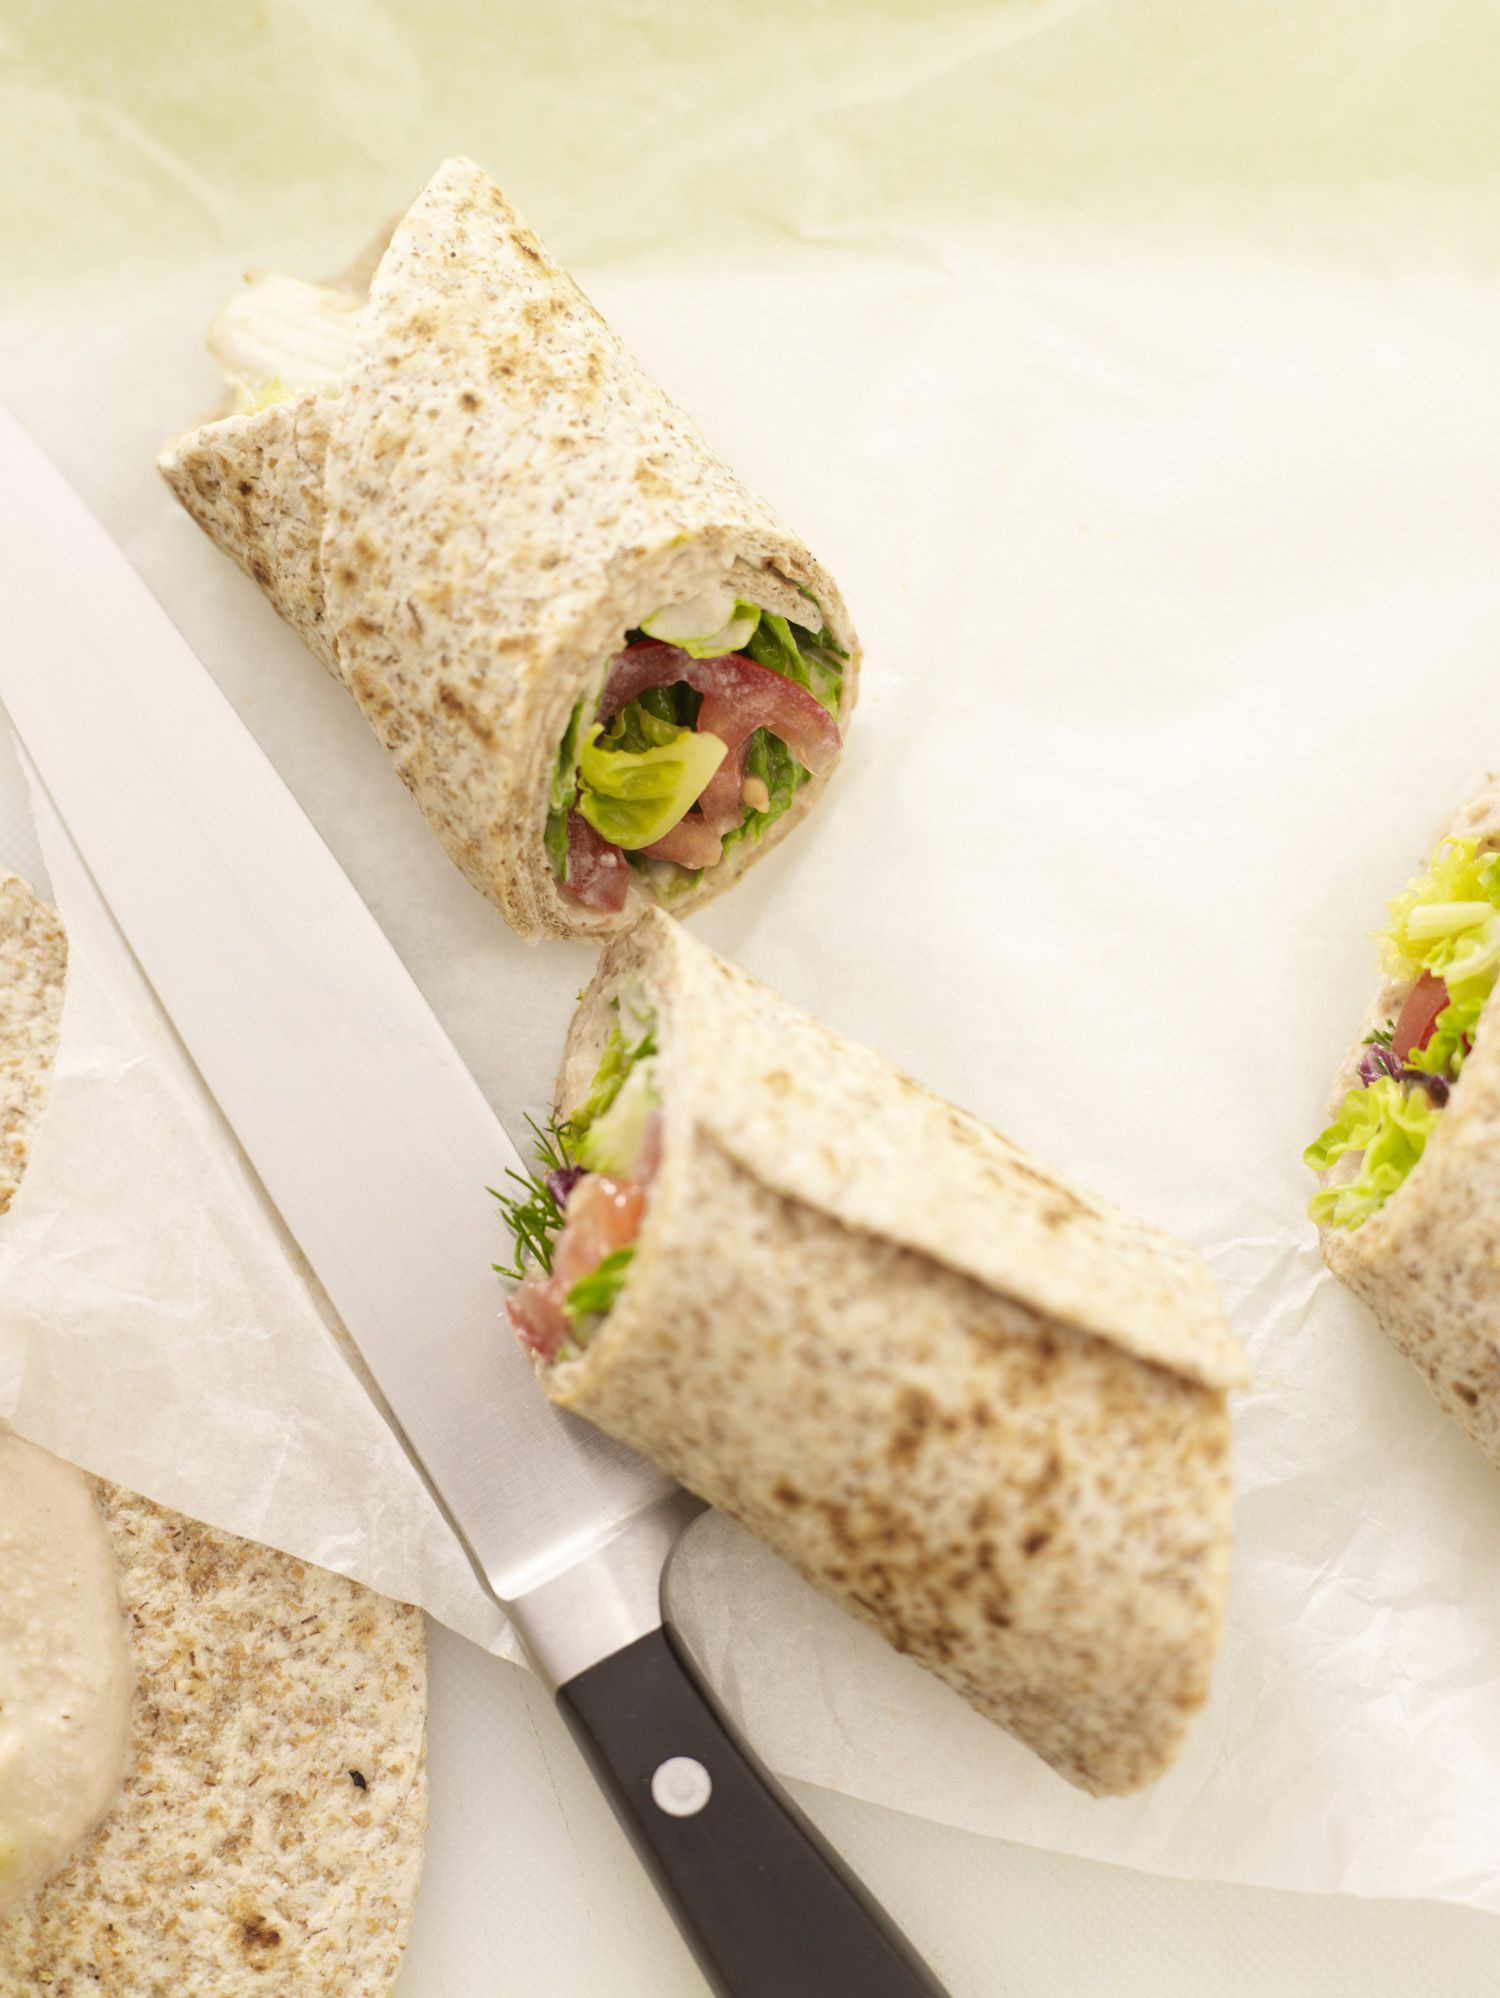 Low Calorie Wraps Recipes
 Low Calorie and Low Fat Tuna Wrap Recipe